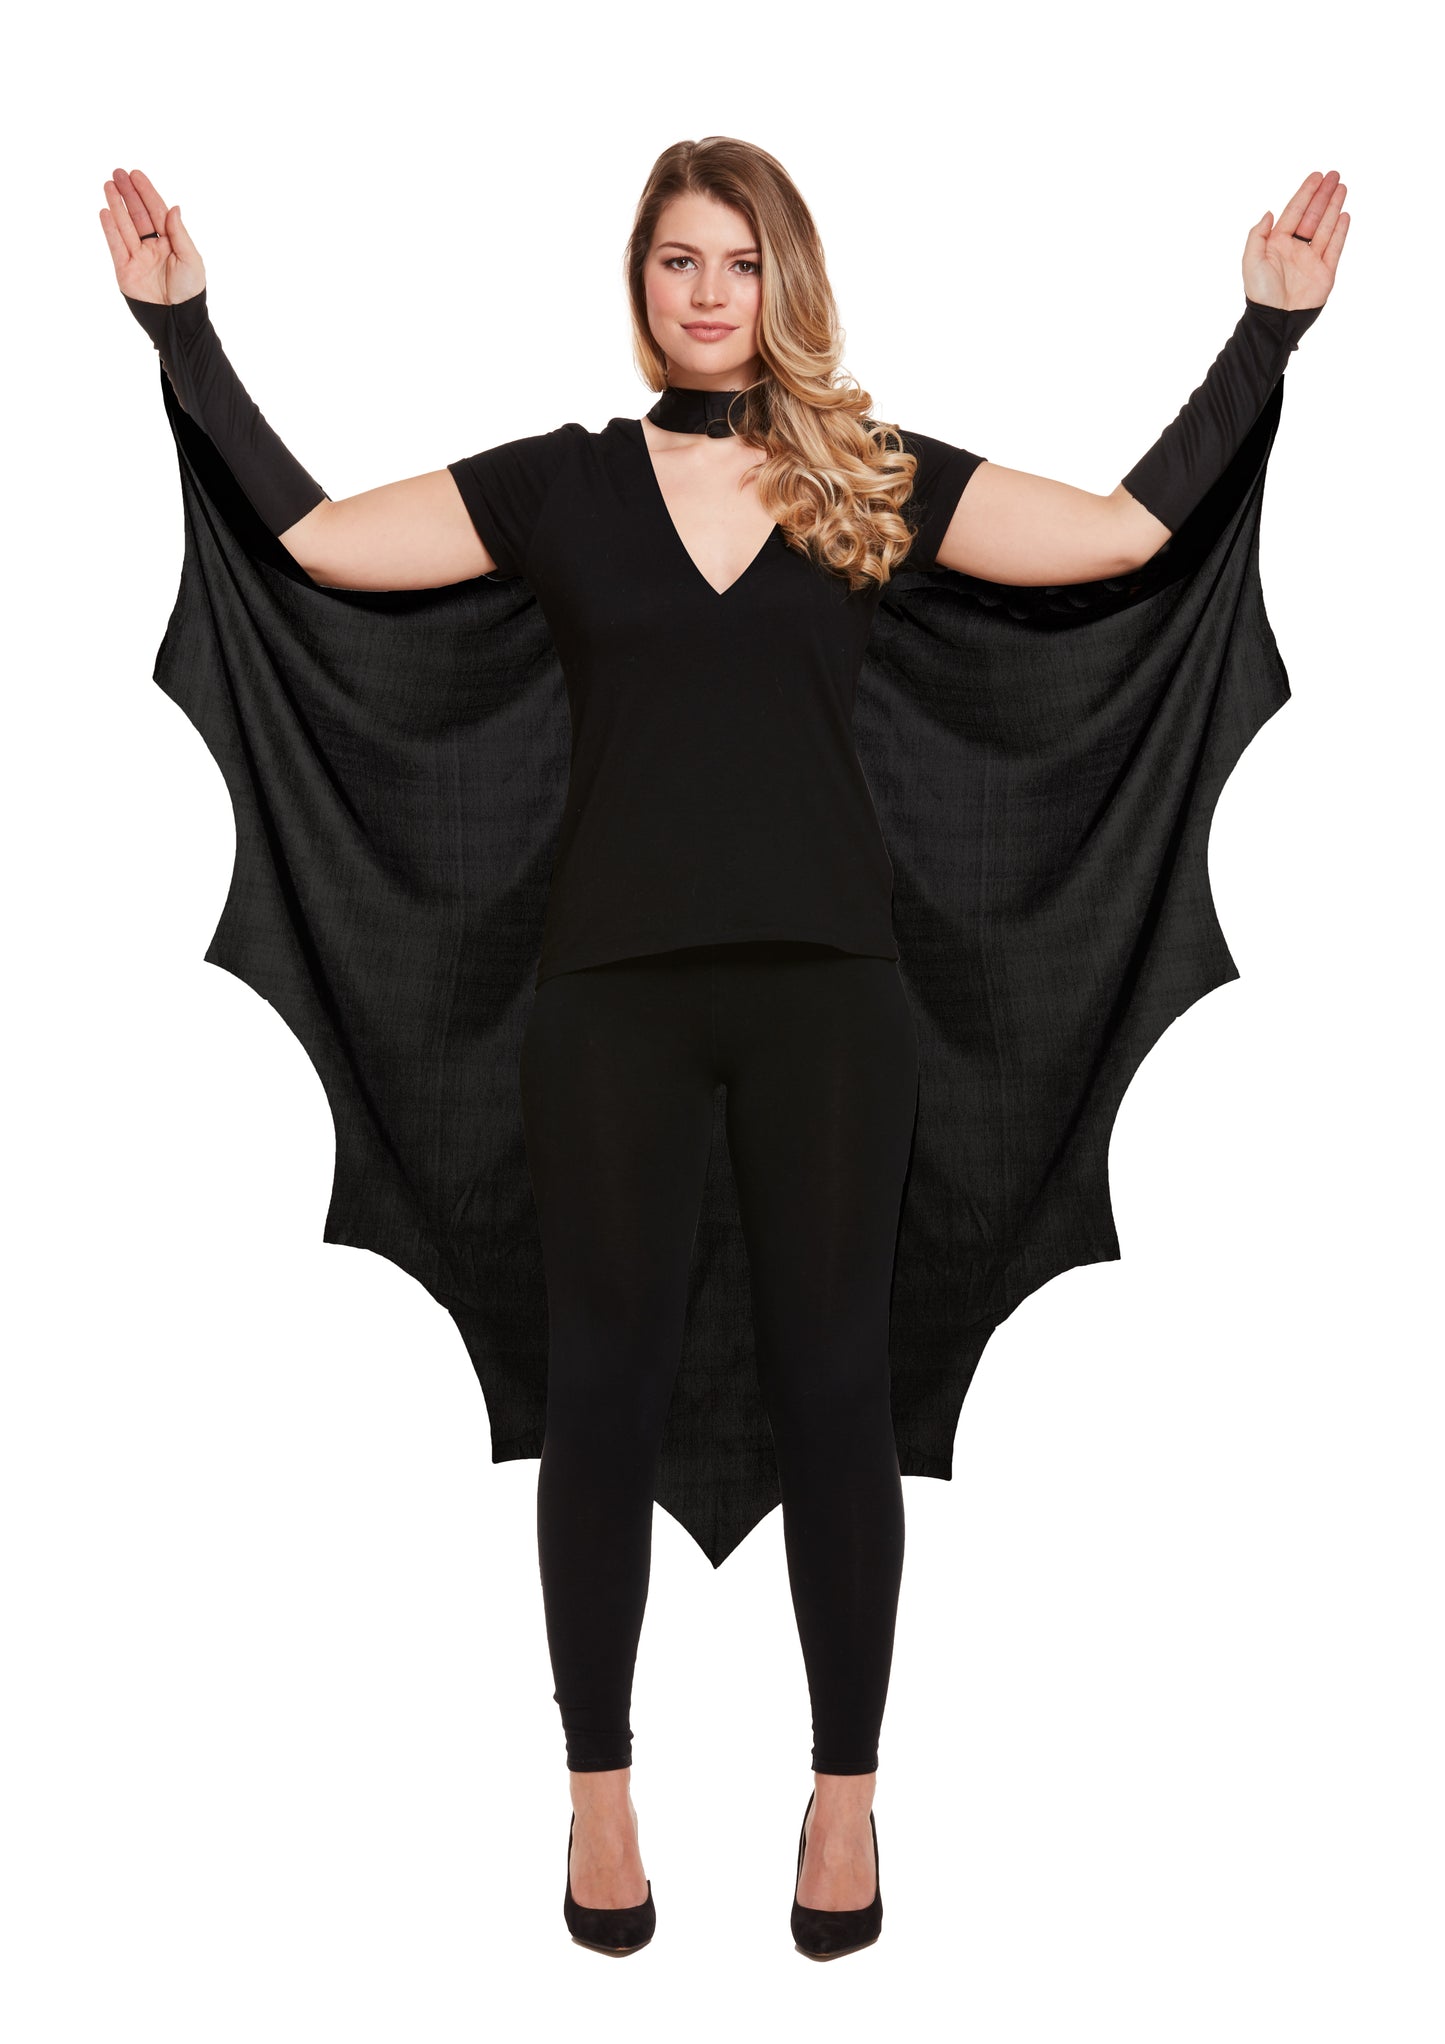 Elegant Adult Bat Cape with Domino Mask - Halloween Costume Set for Sophisticated Allure and Mysterious Charm